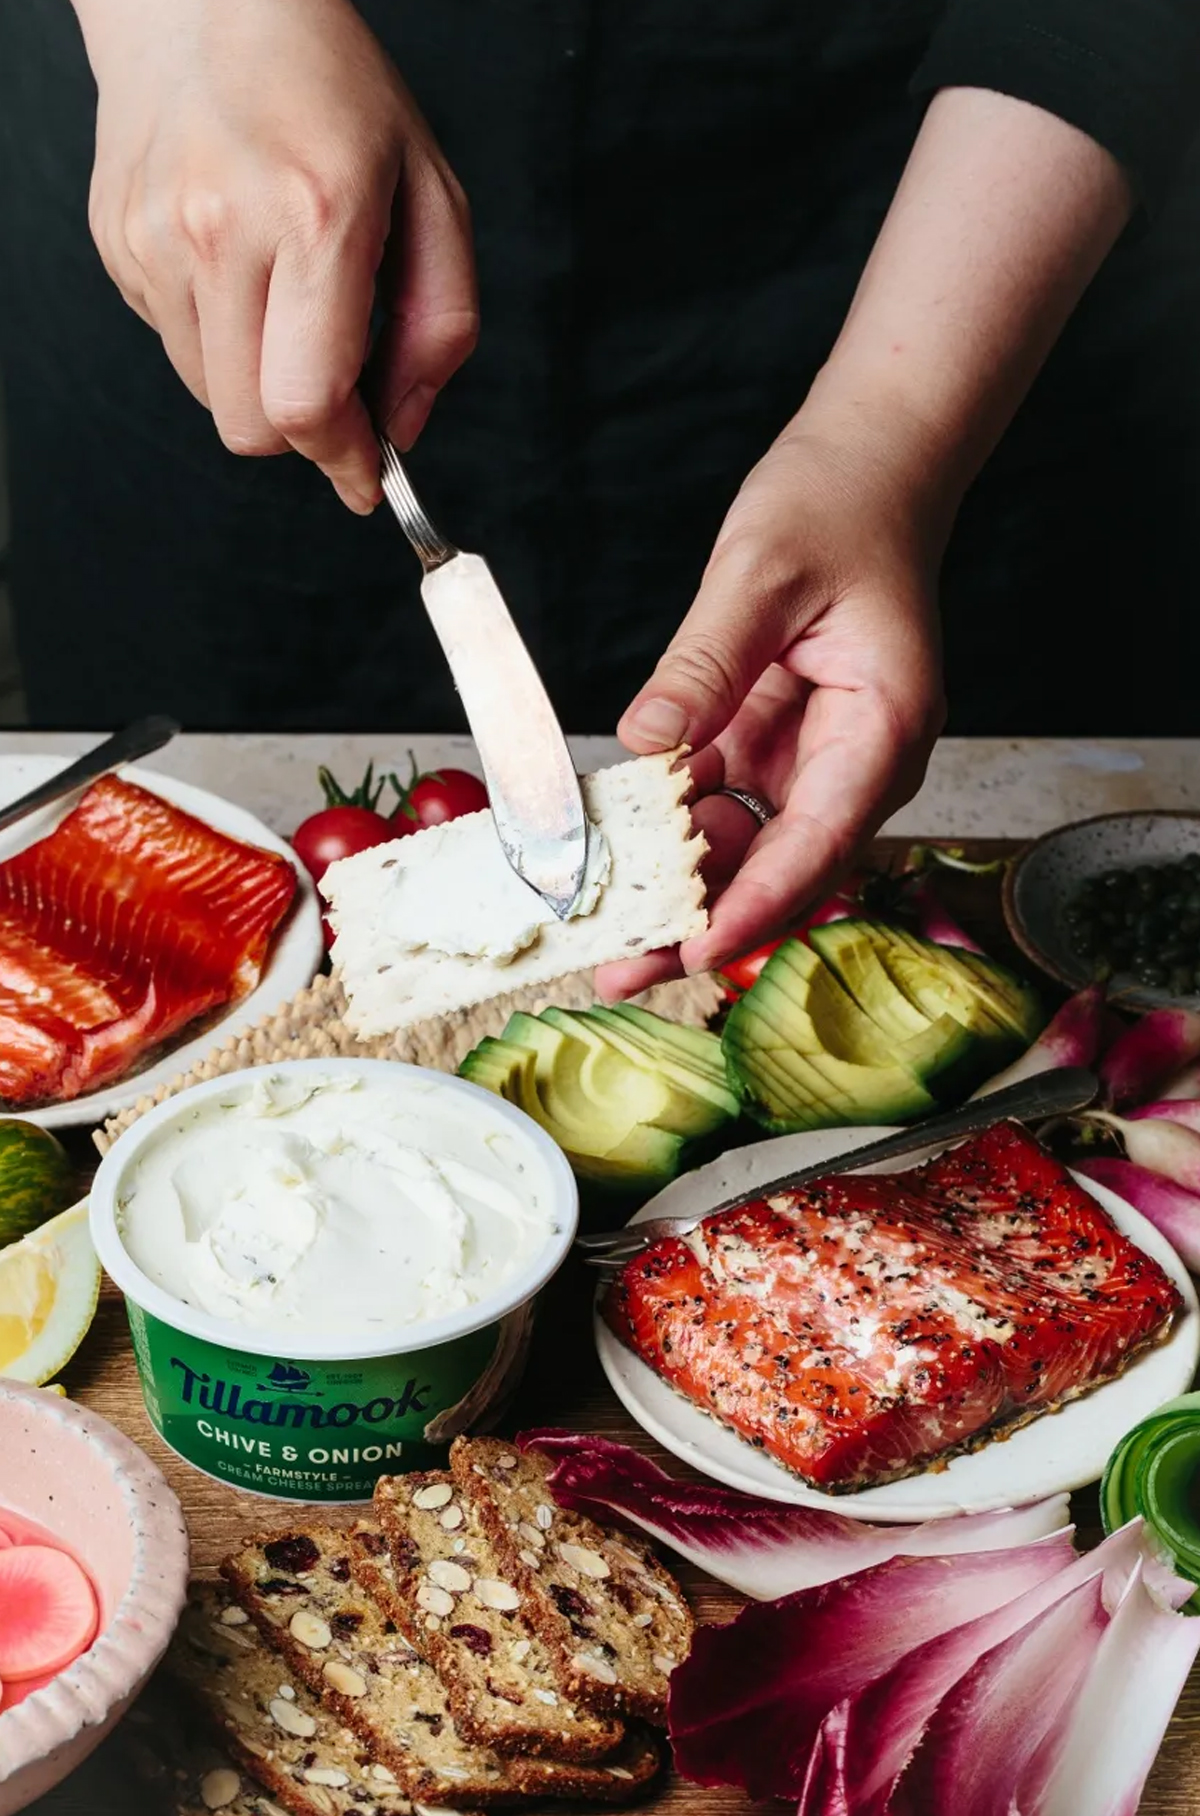 Beyond Sweet and Savory's board is filled with onion dip, hard boiled eggs, salmon, and avocado.